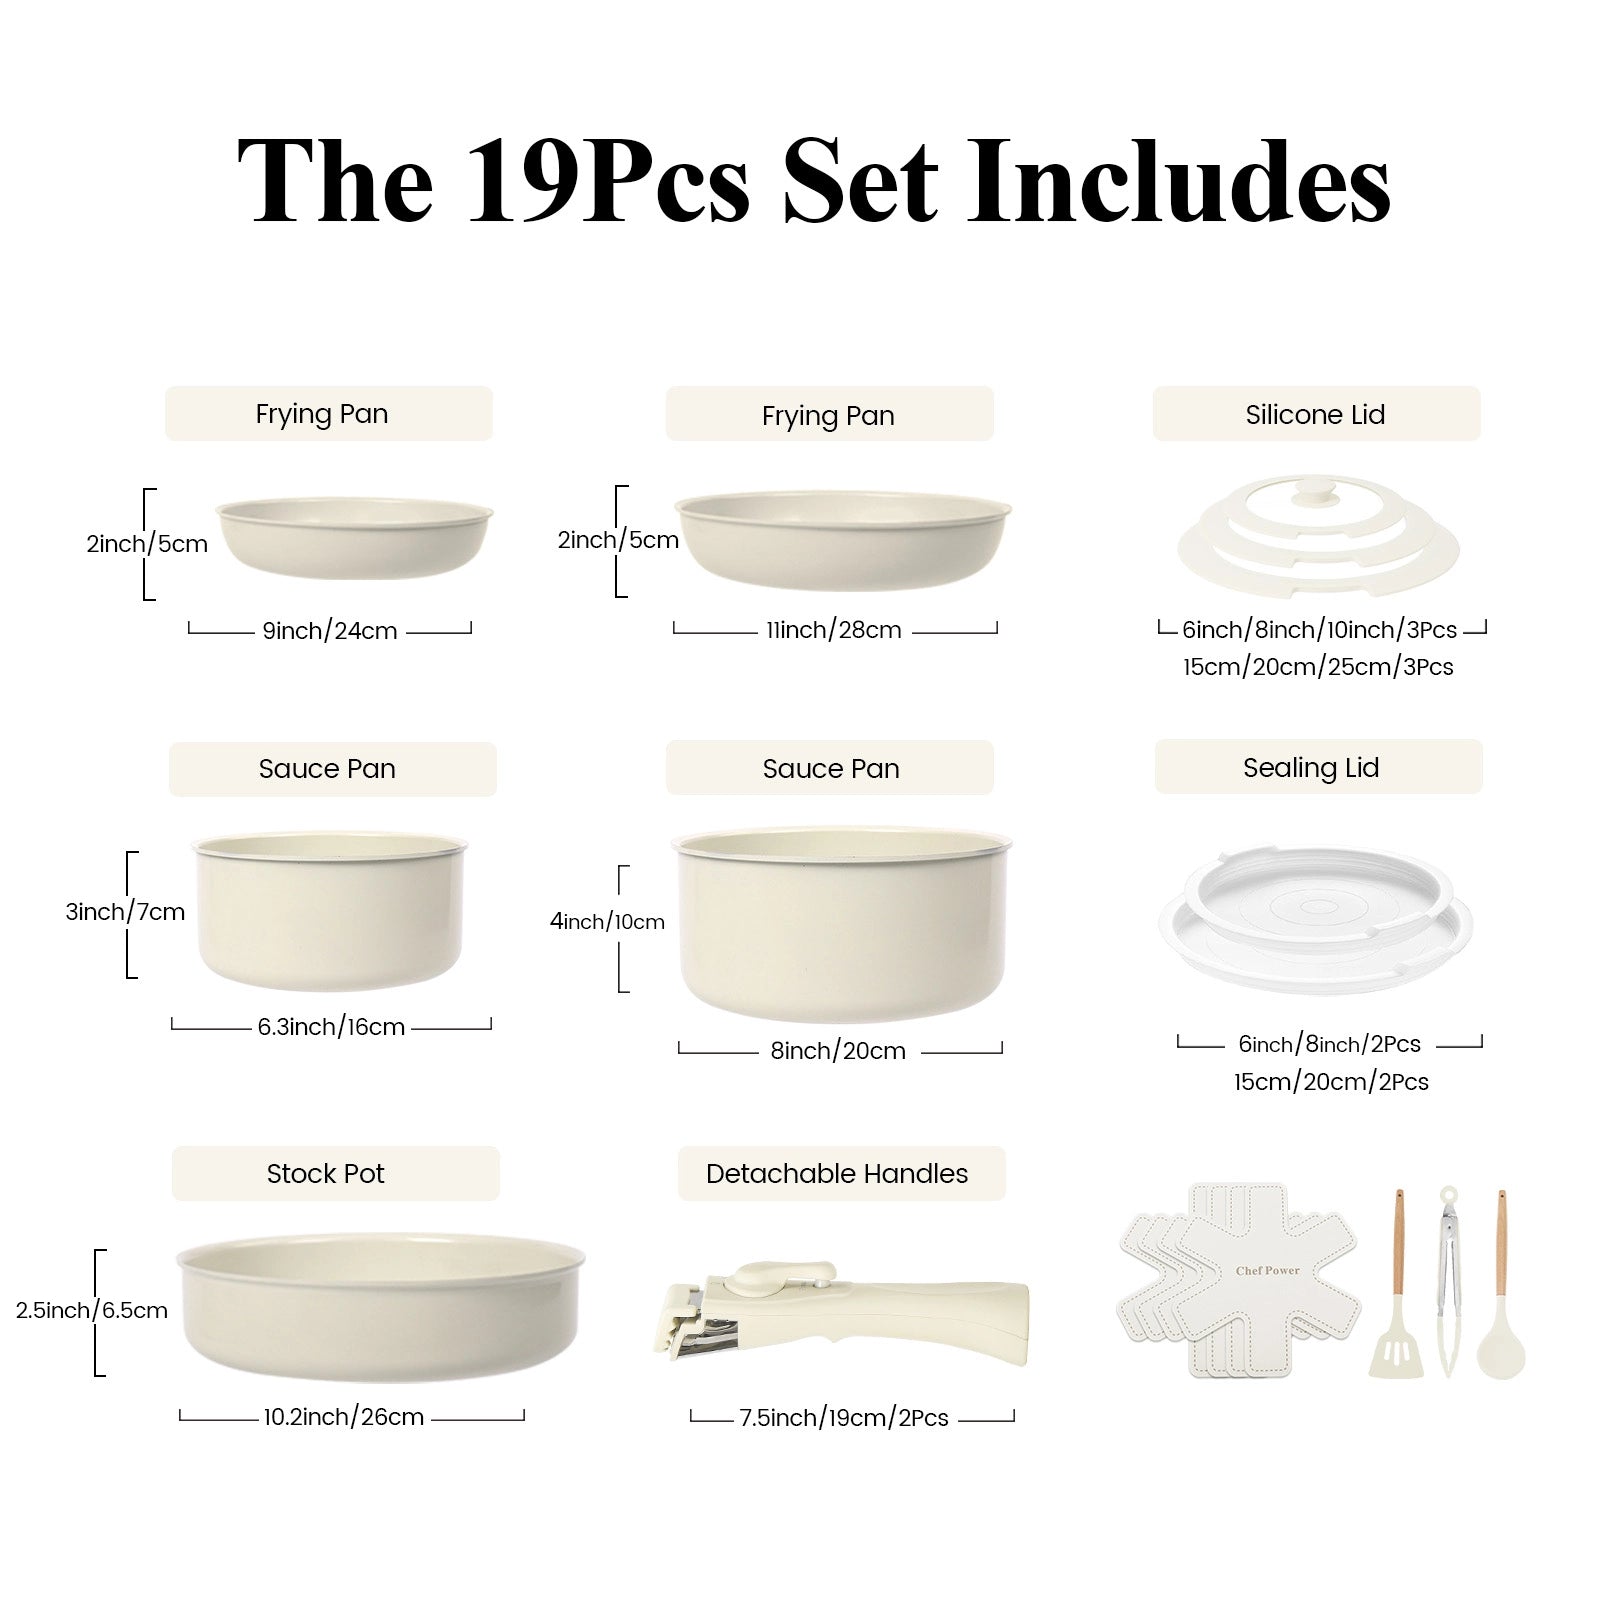 What is included in the detachable handle pans and pots set?